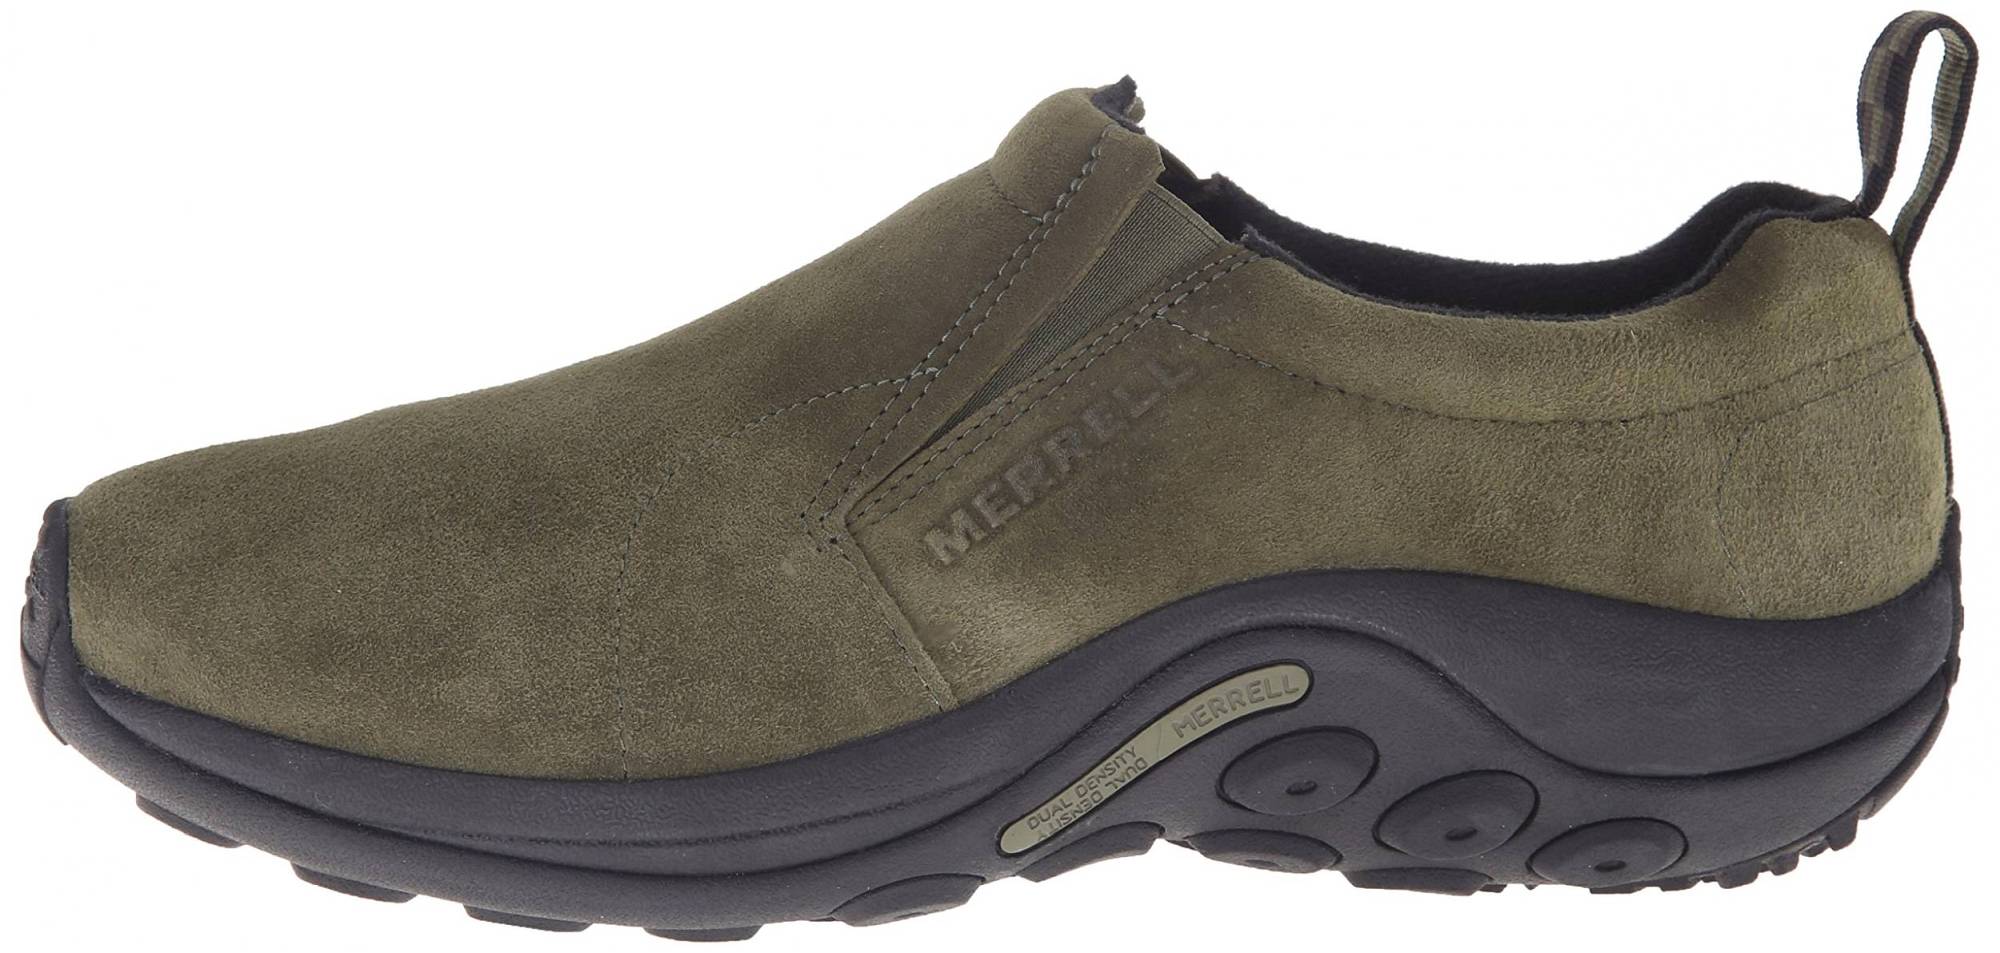 Merrell Jungle Moc – Shoes Reviews & Reasons To Buy